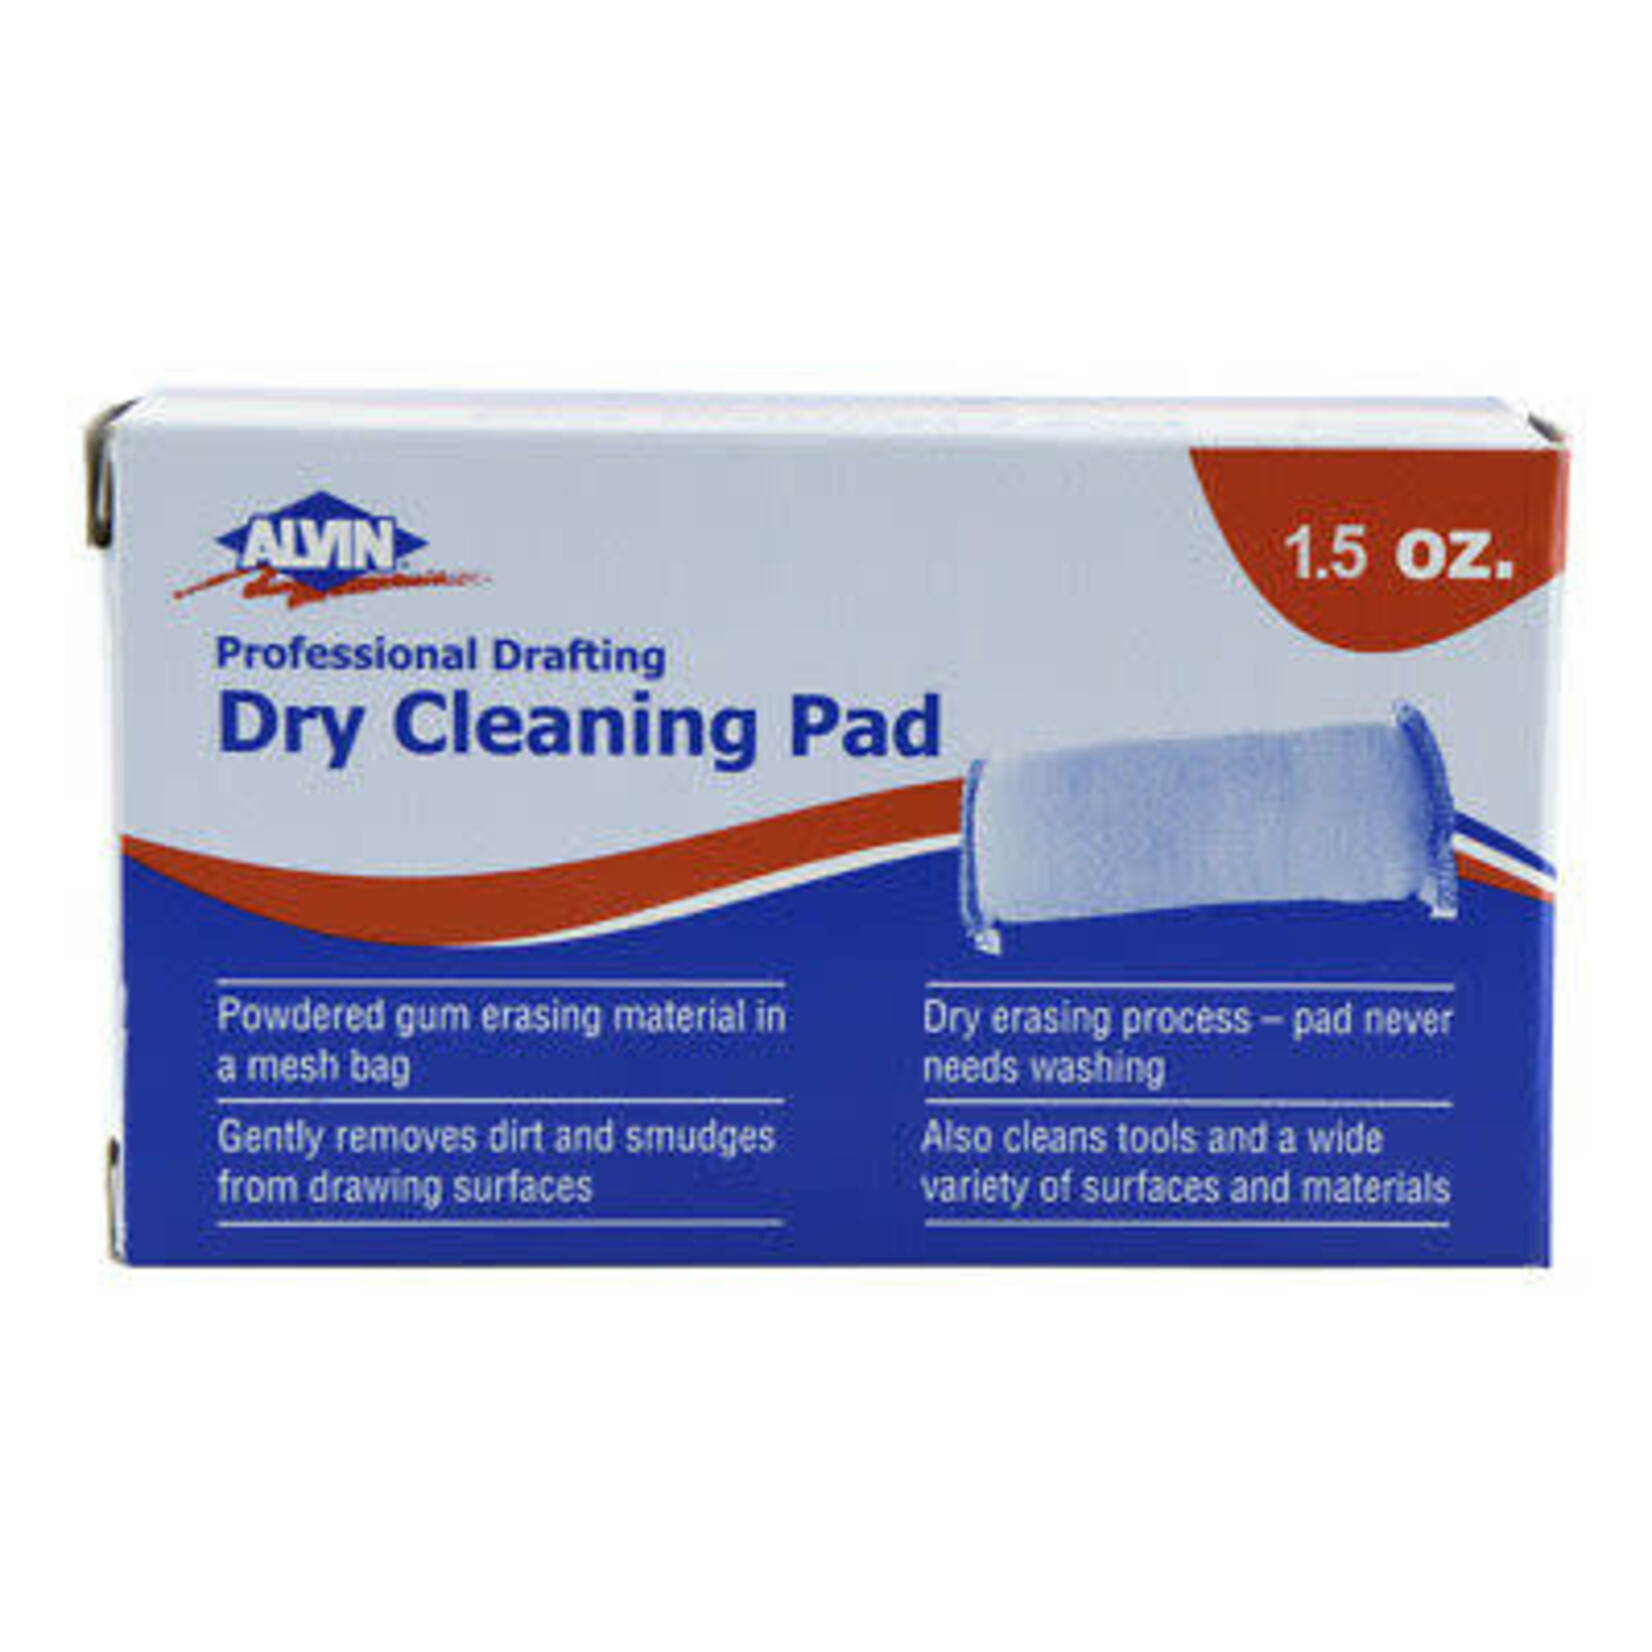 Alvin Professional Drafting Dry Cleaning Pad 1 1/2oz